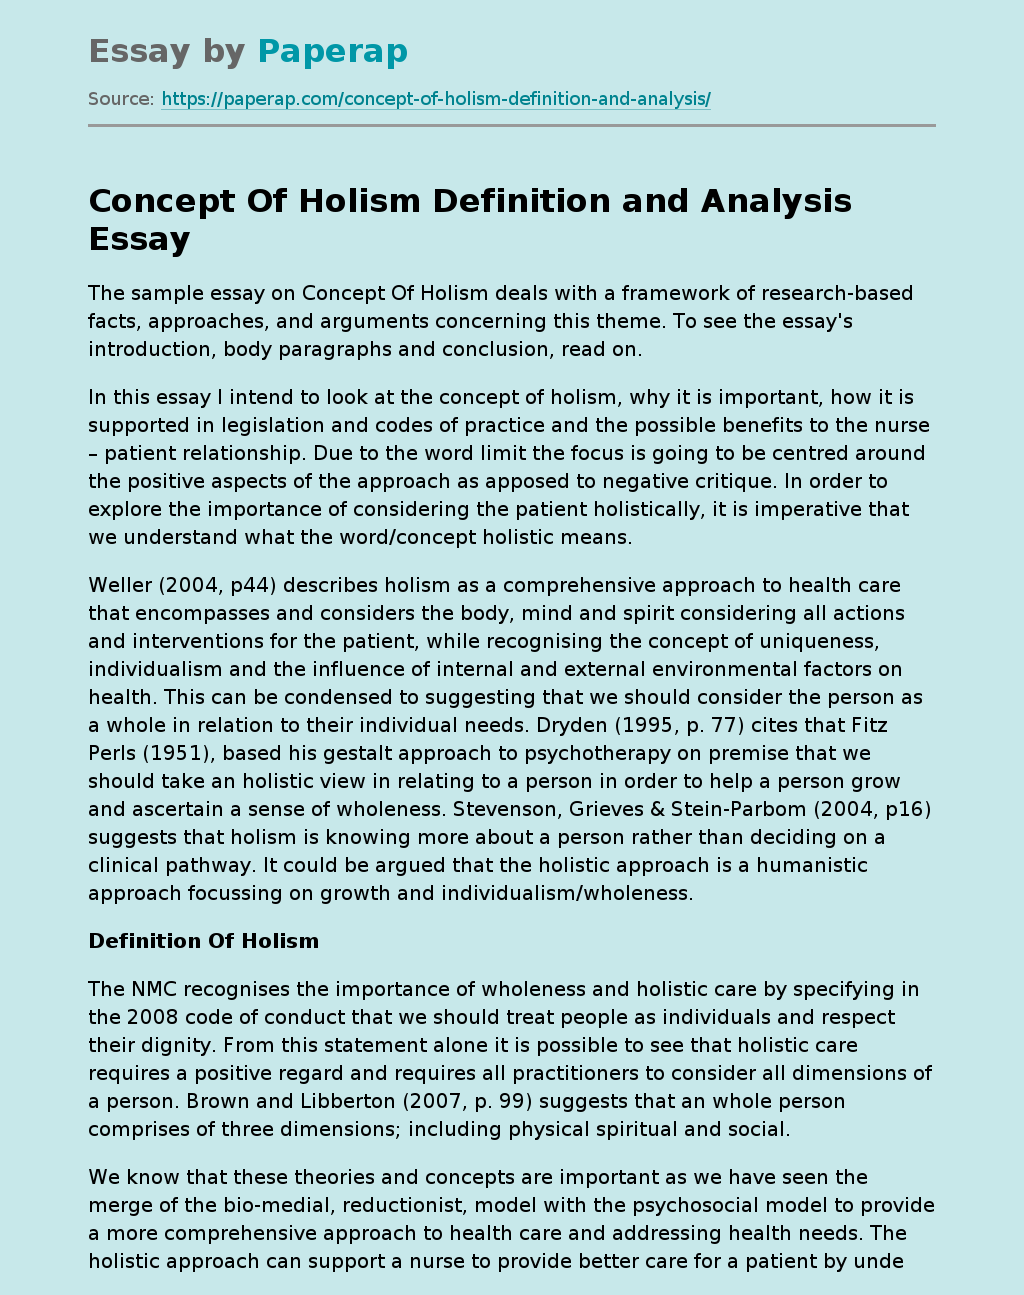 Concept Of Holism Definition and Analysis